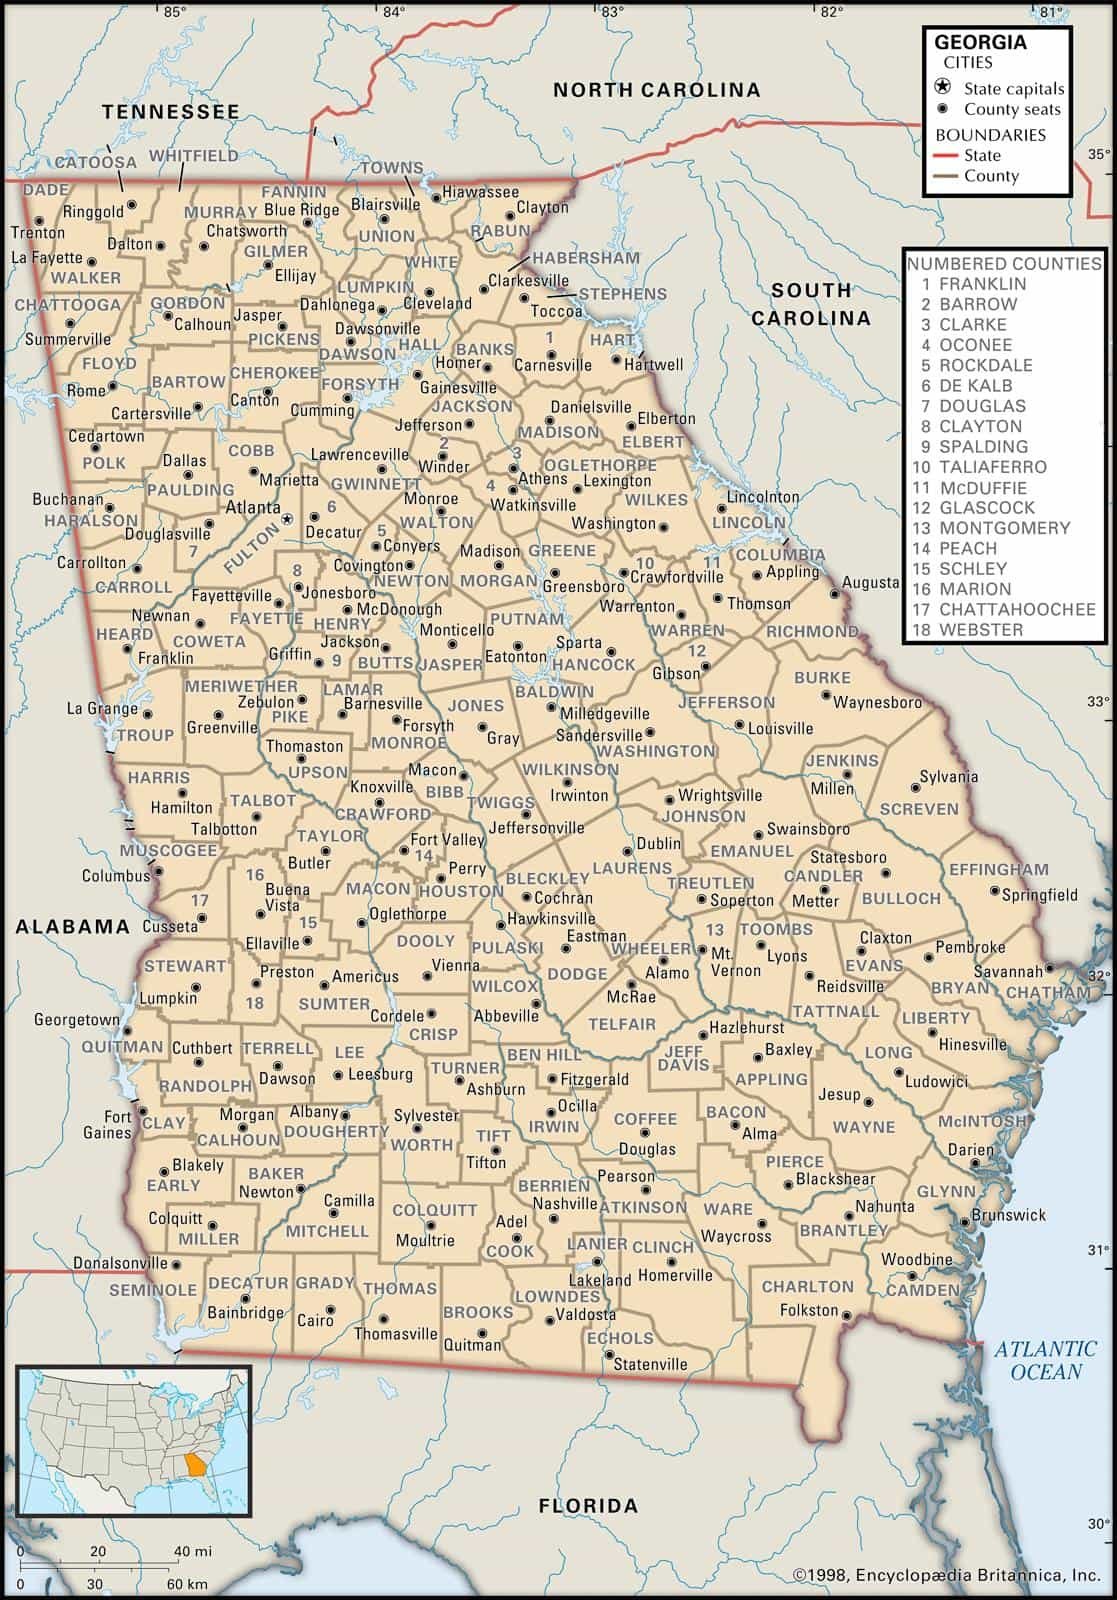 historical-facts-of-georgia-counties